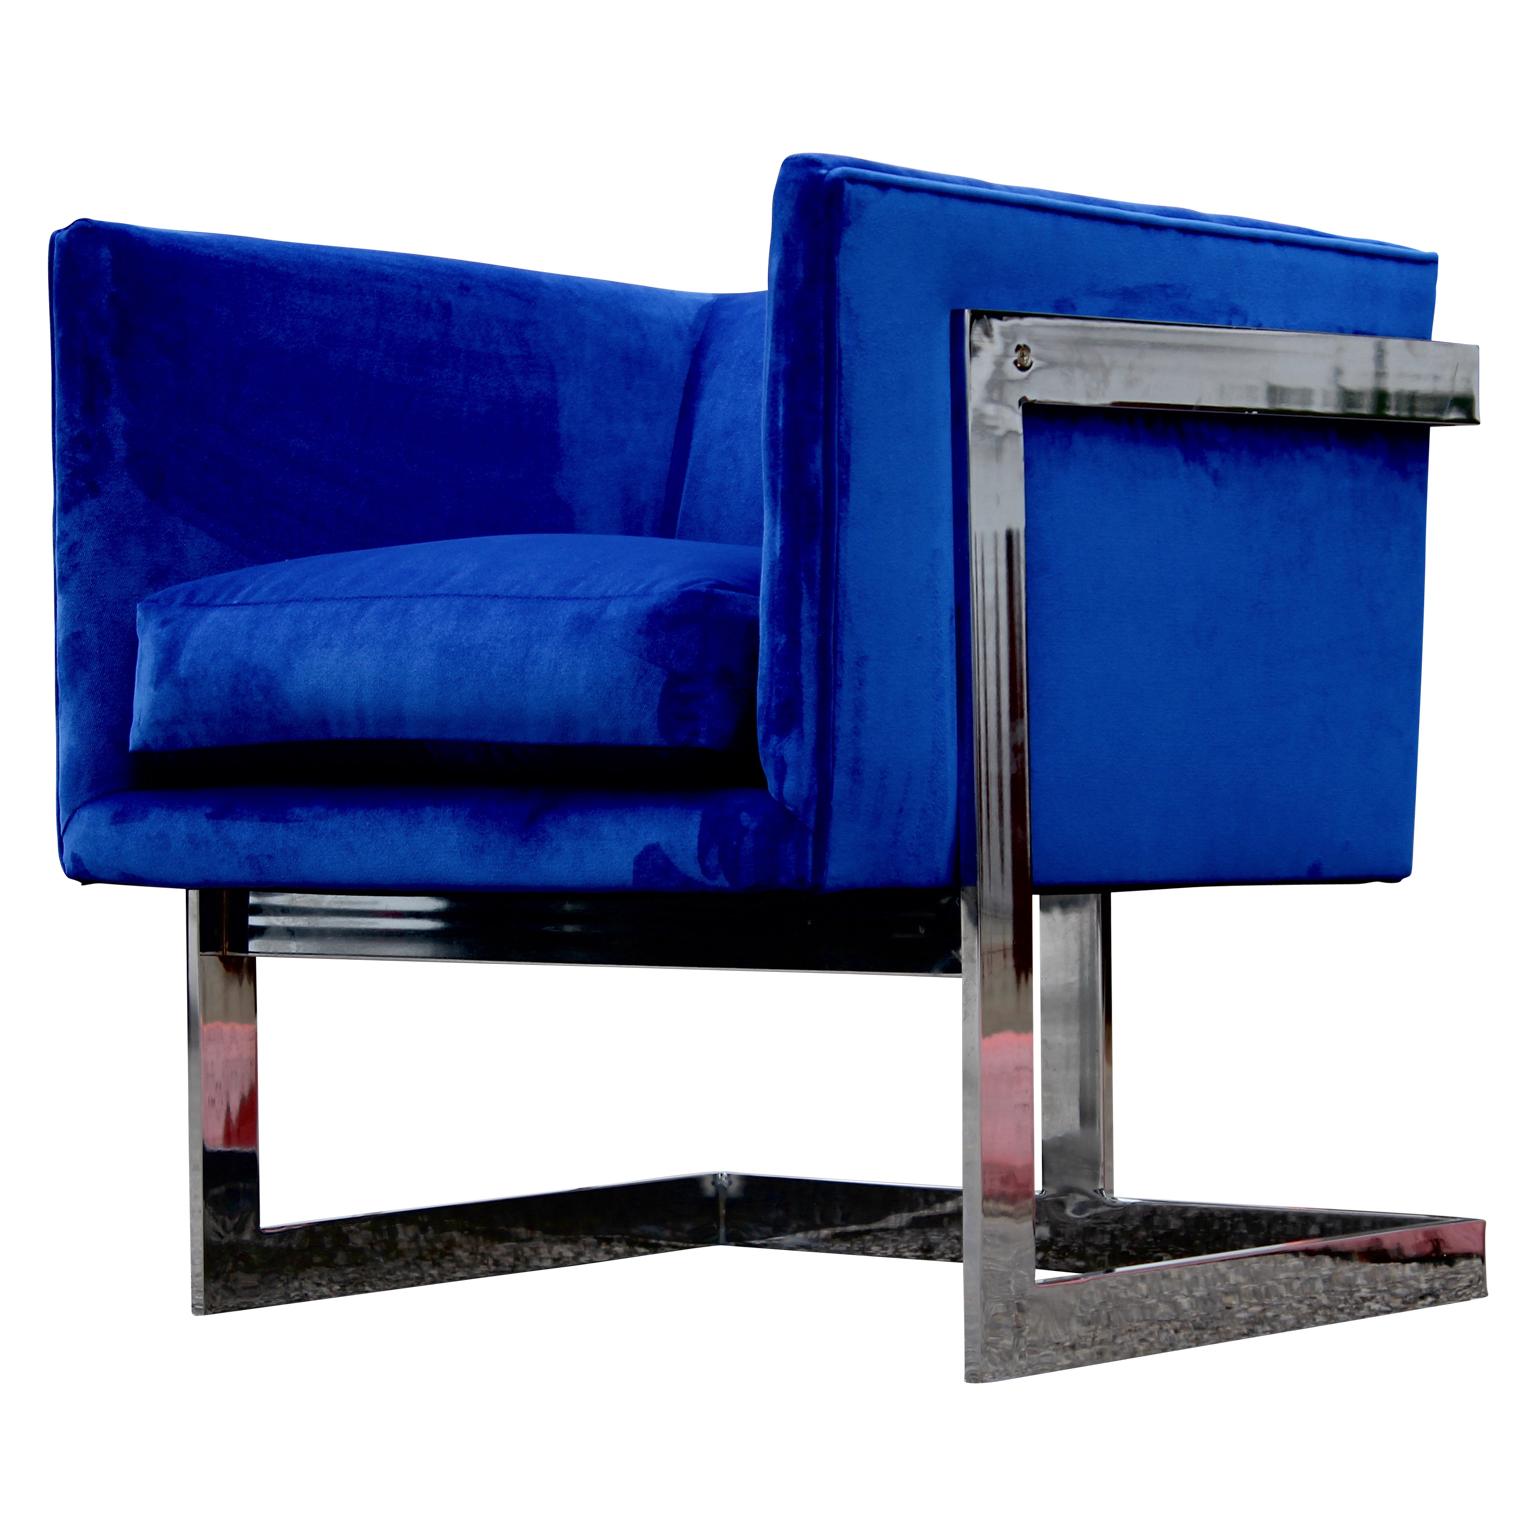 Gorgeous chrome cantilevered cube lounge chair designed by Milo Baughman for Thayer Coggin freshly upholstered in a lush blue velvet. We have three available for purchase.